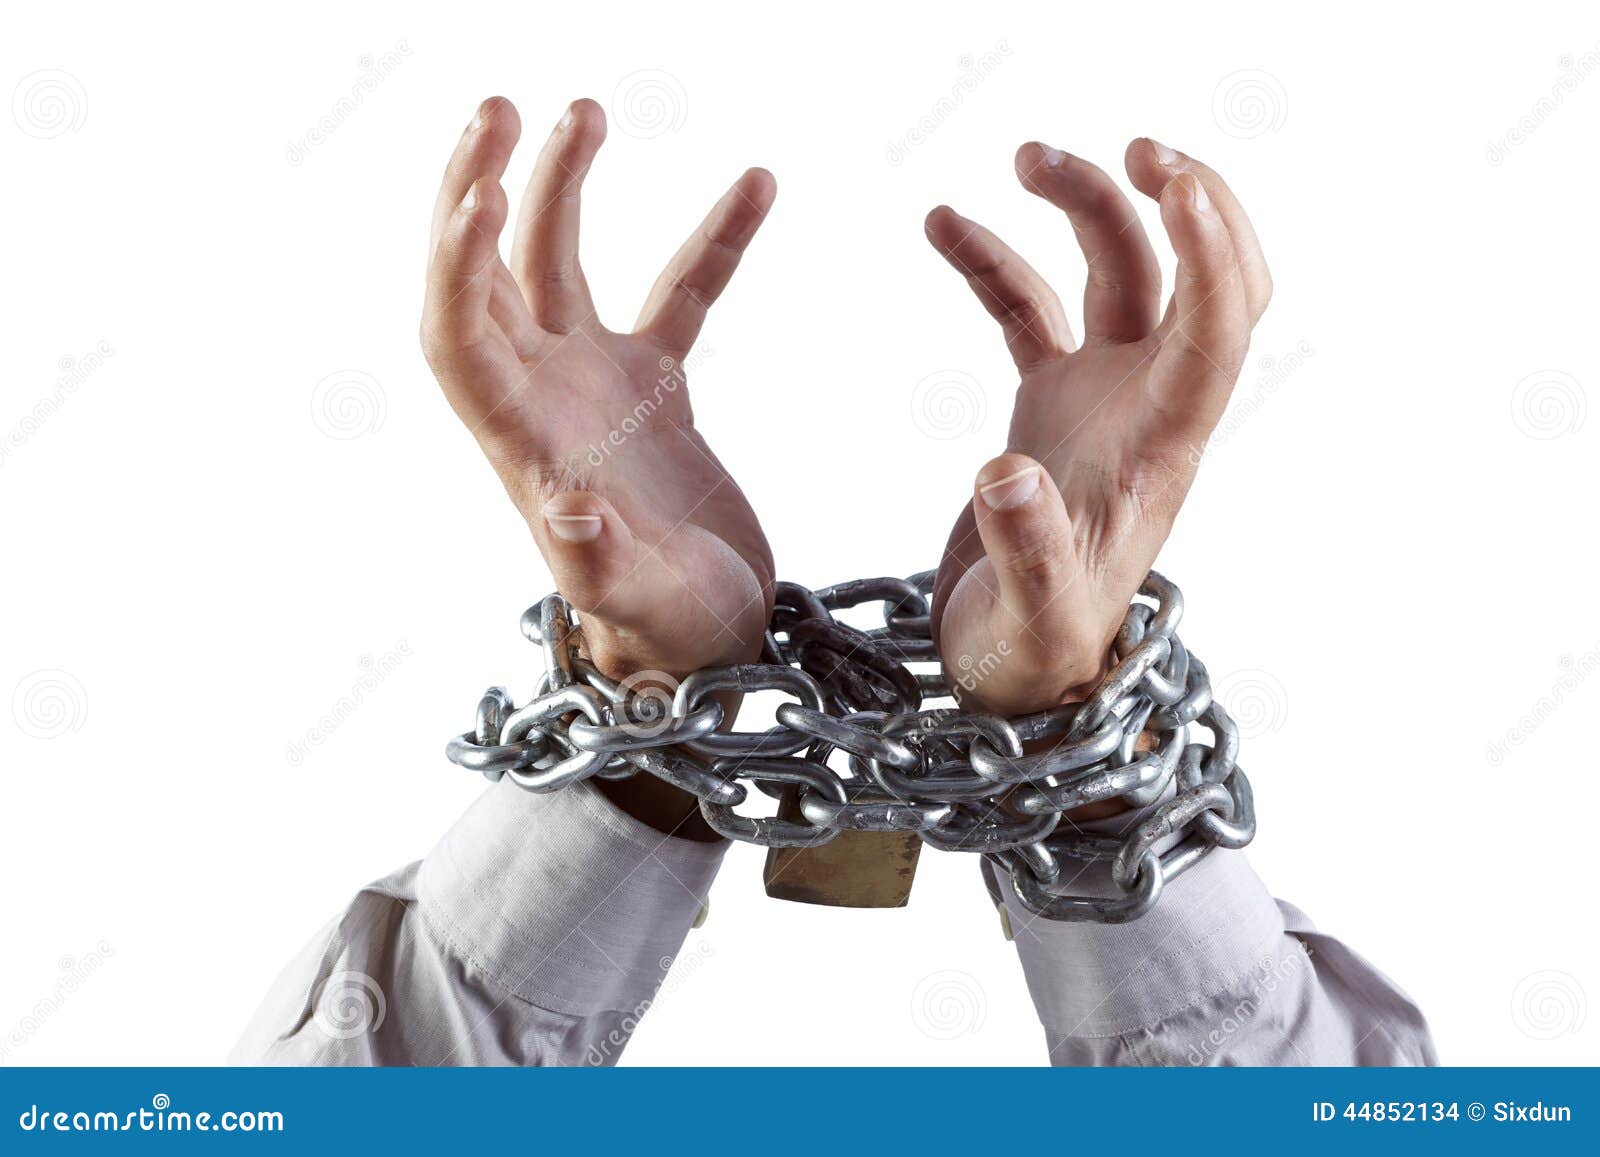 tense hands chained